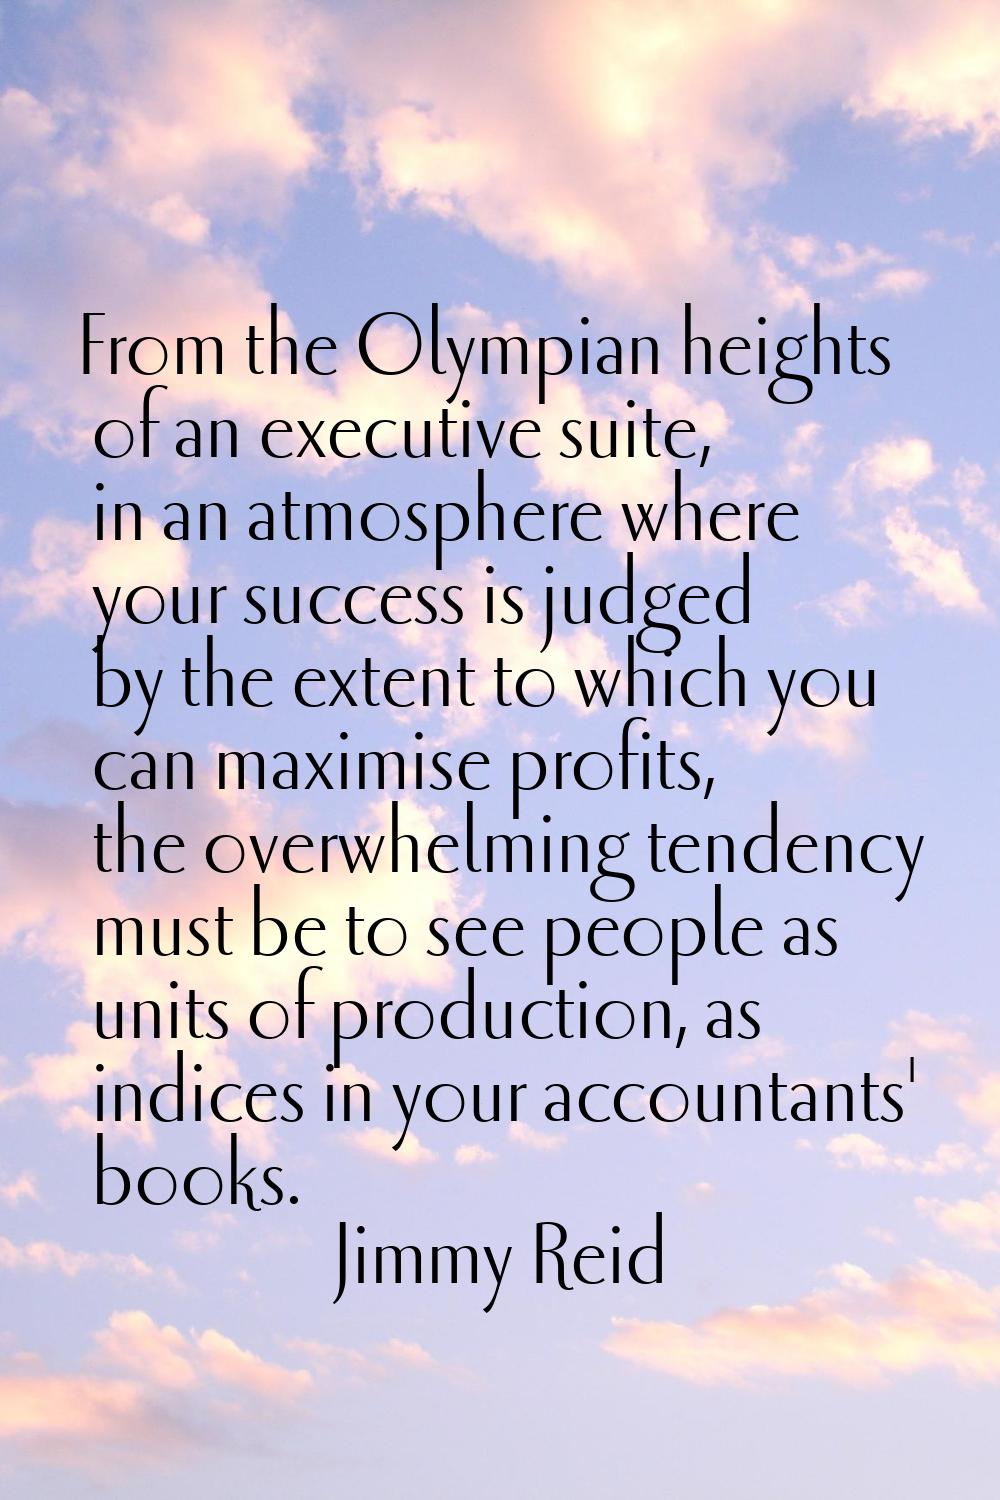 From the Olympian heights of an executive suite, in an atmosphere where your success is judged by t